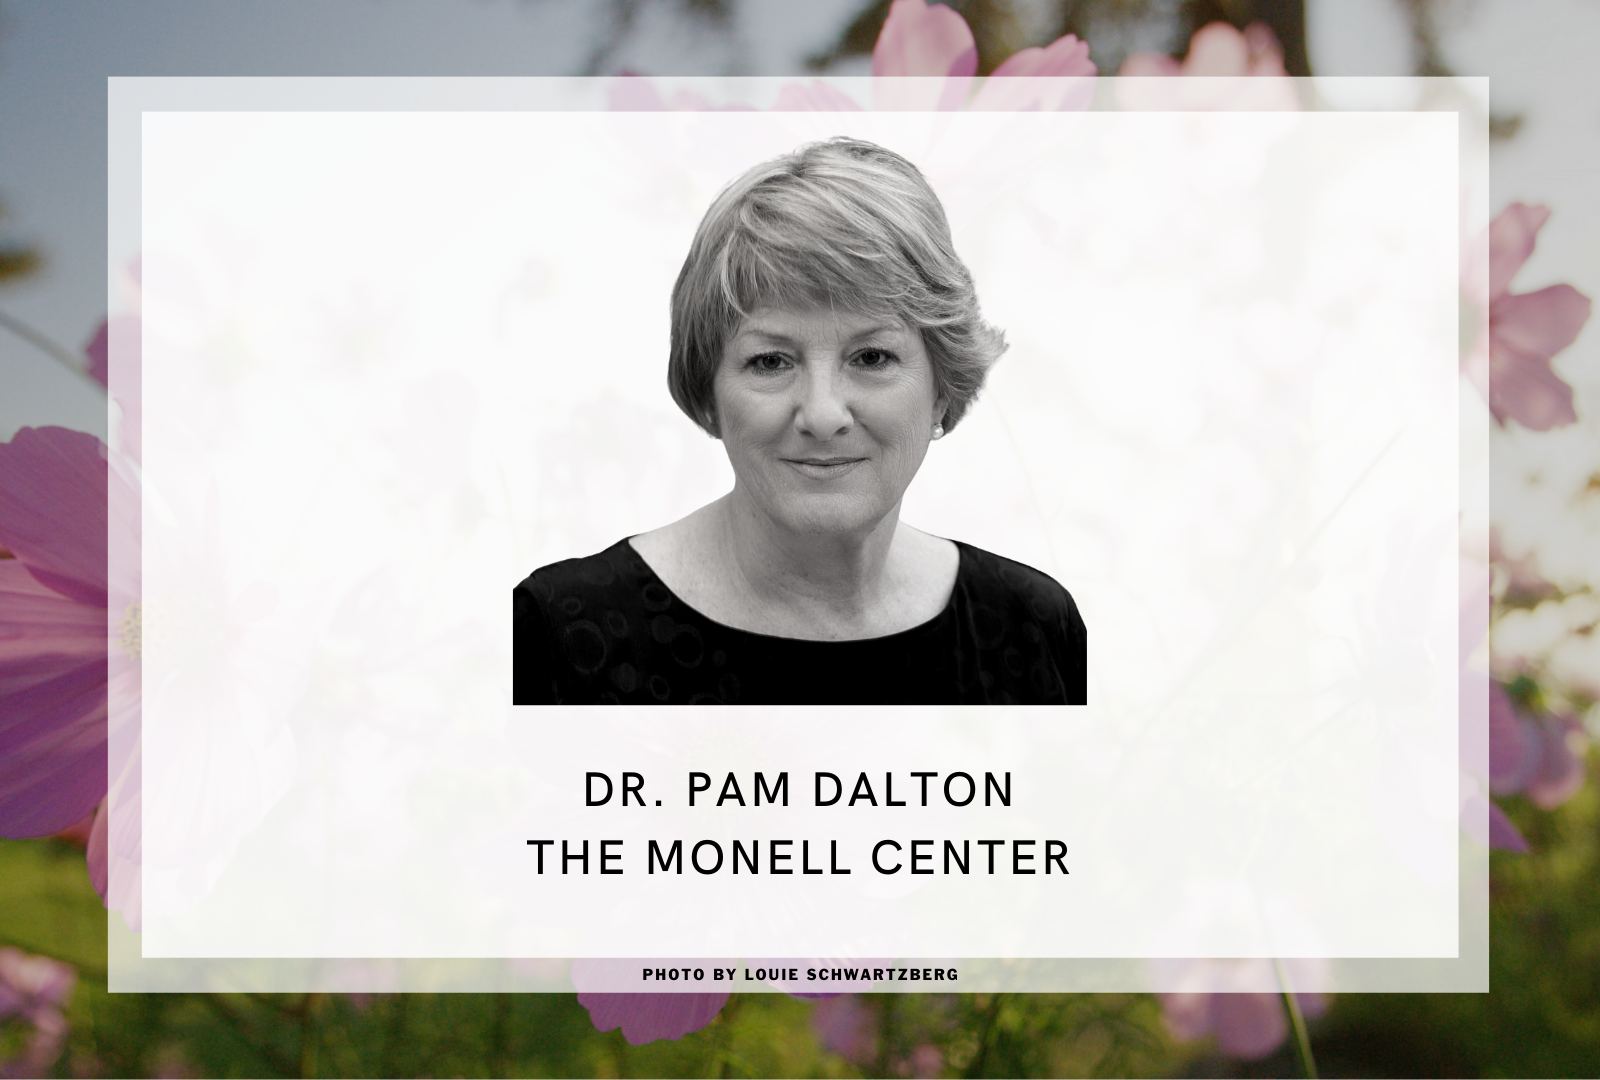 WHAT THE NOSE KNOWS: THE SCIENCE OF SMELL – PAM DALTON/MONELL CENTER